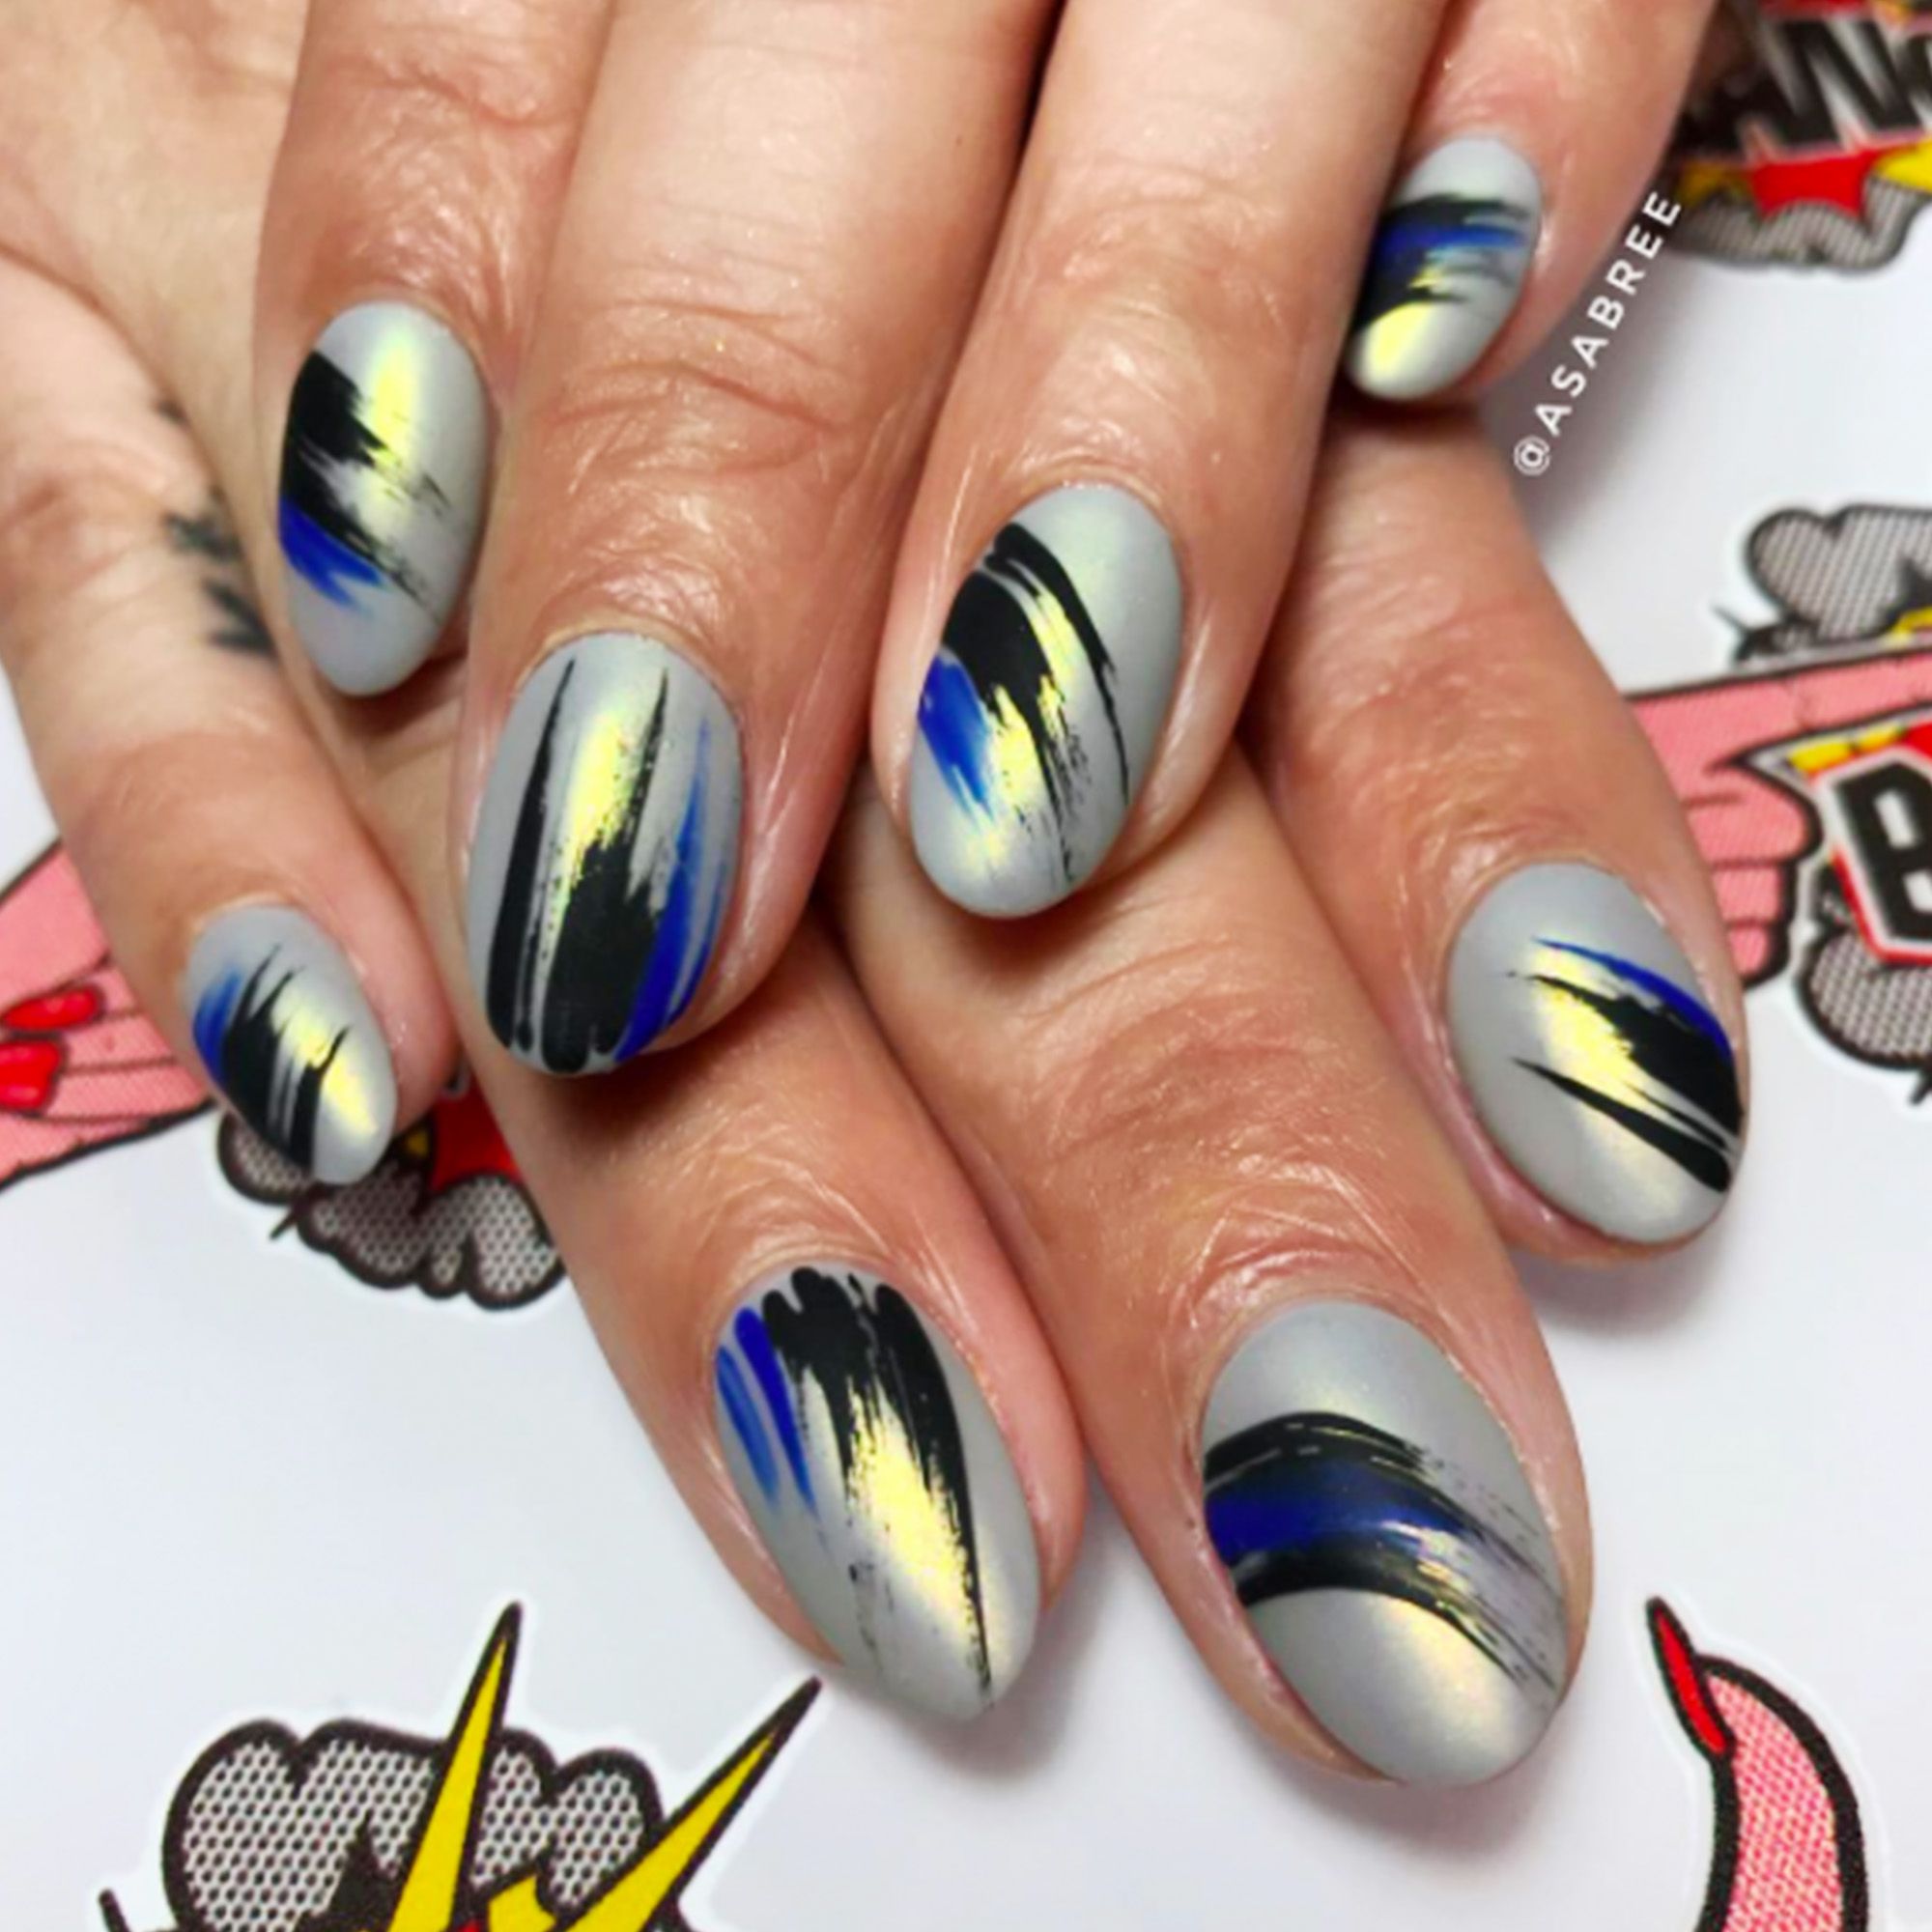 30+ Simple And Artistic Nail Art Designs To Inspire You | Unghie idee,  Unghie, Unghie gel